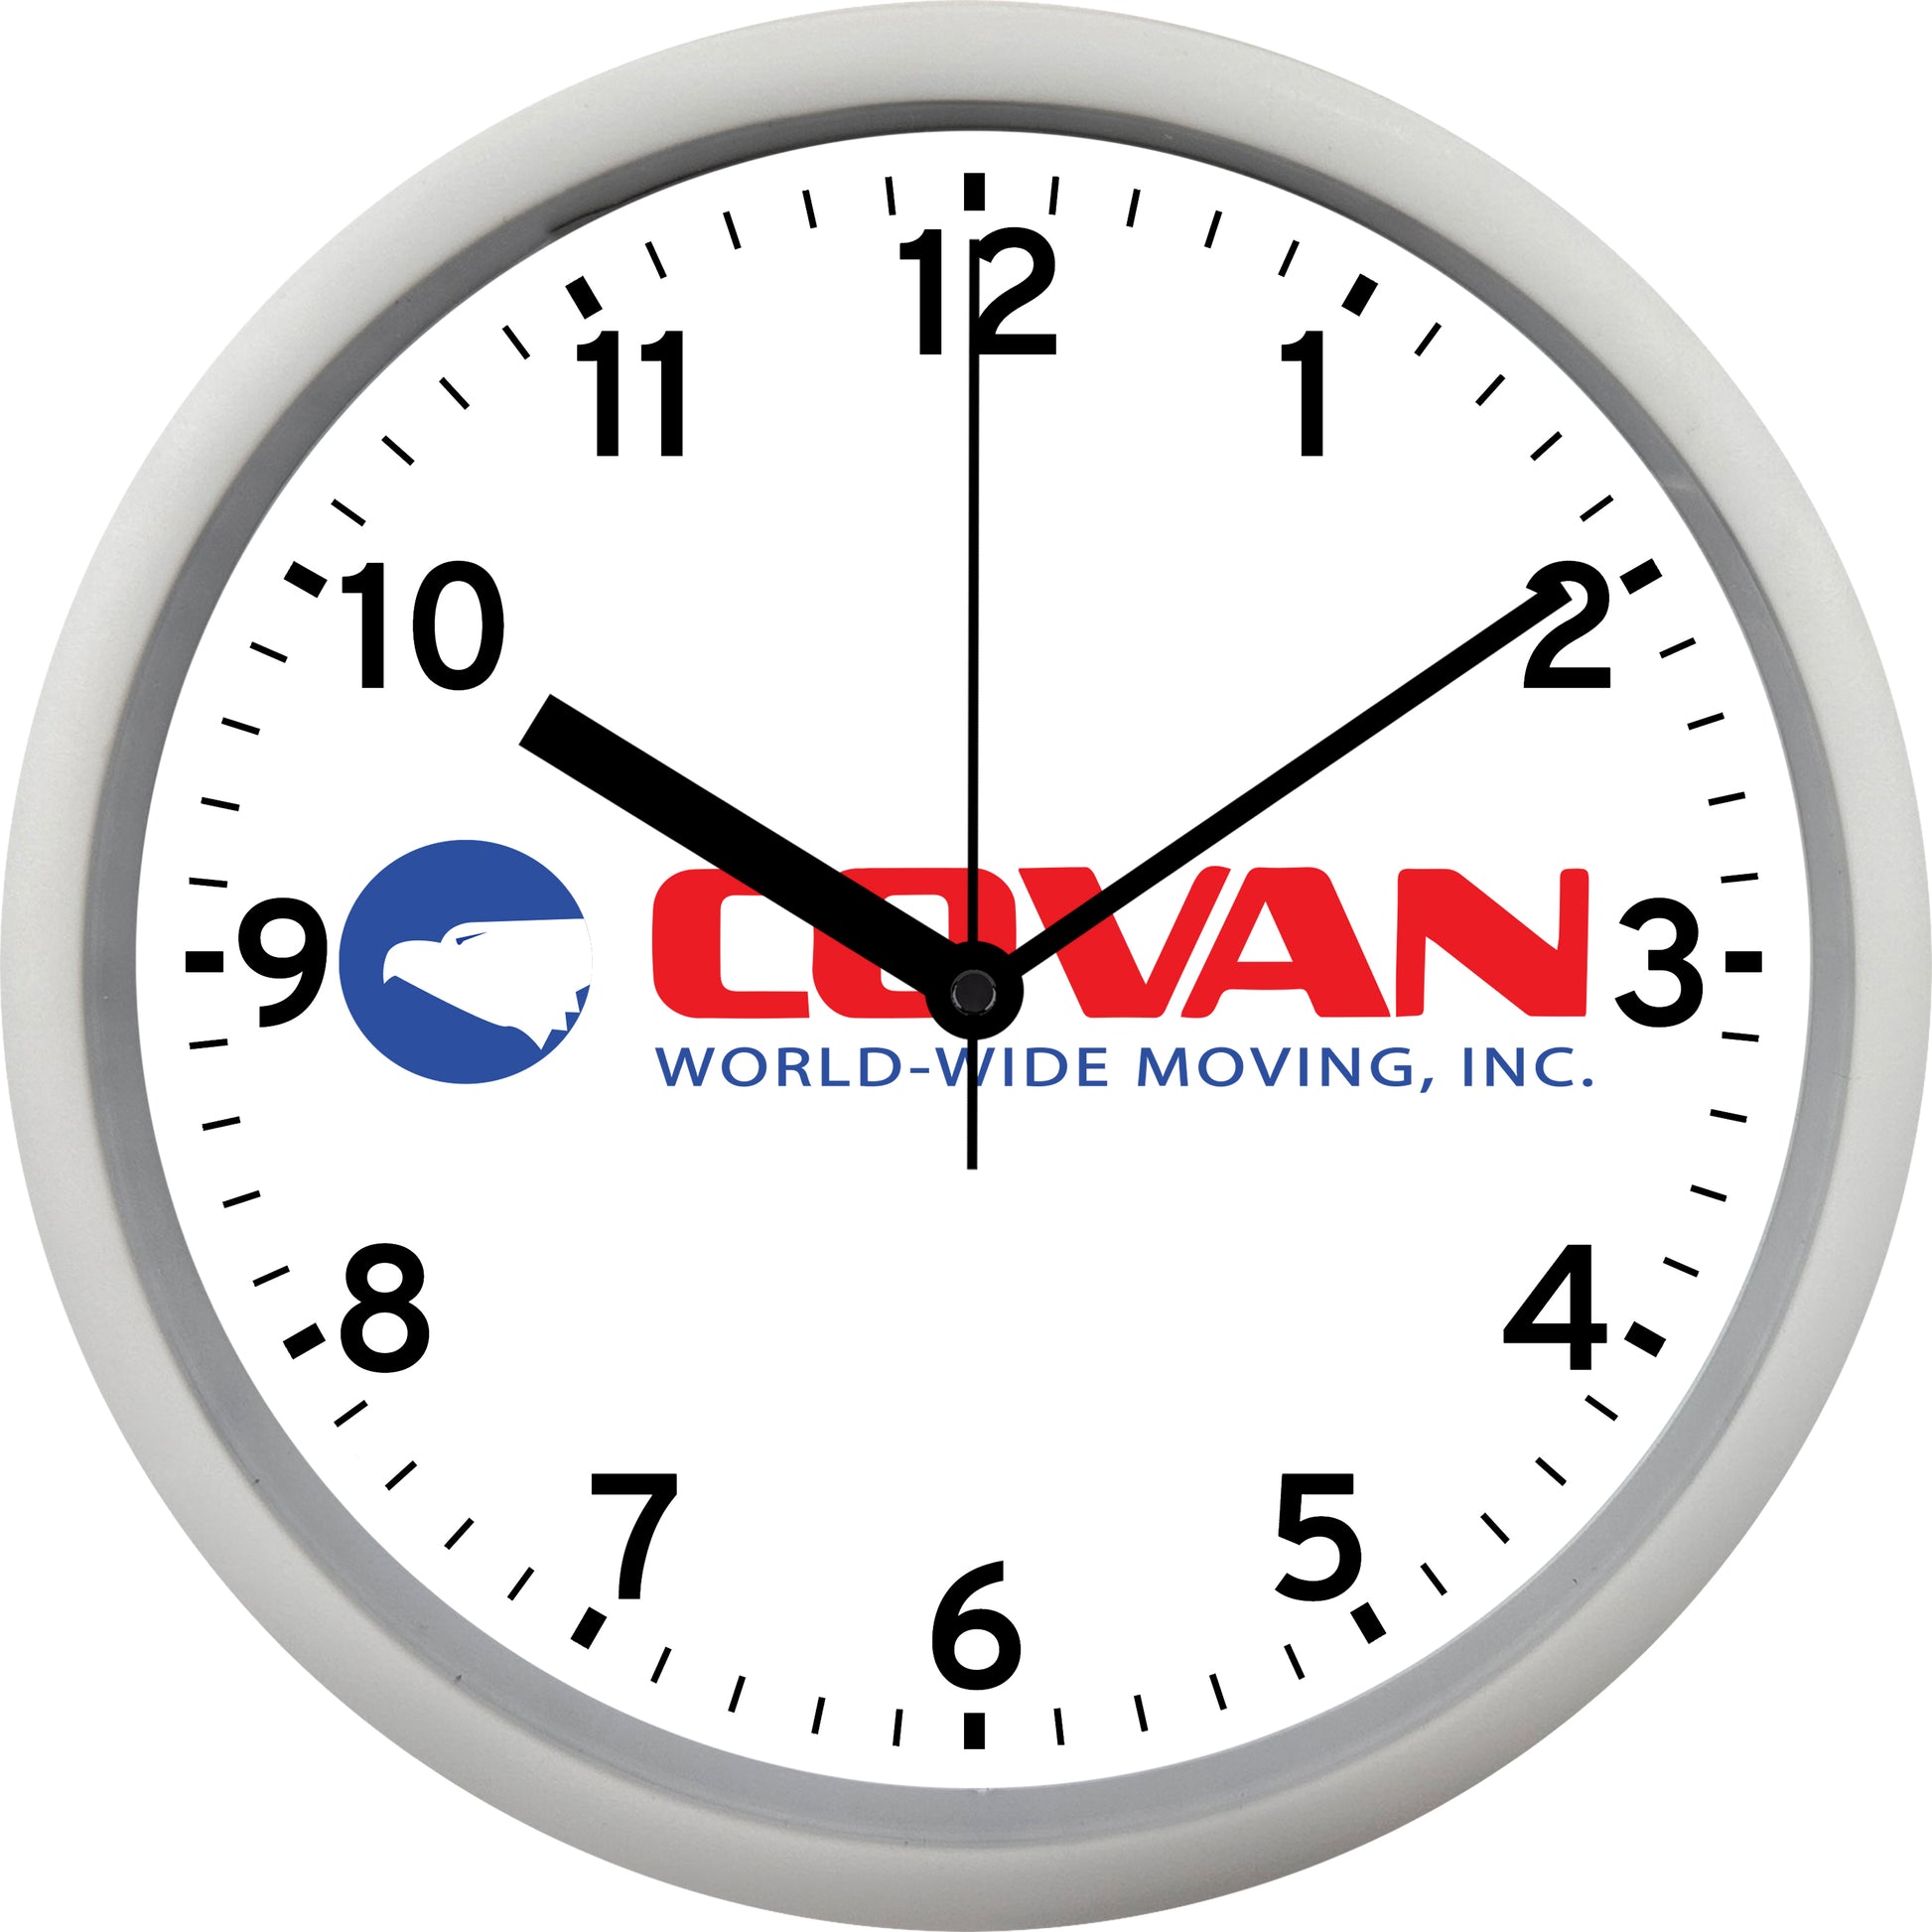 Covan World-Wide Moving, Inc. Wall Clock